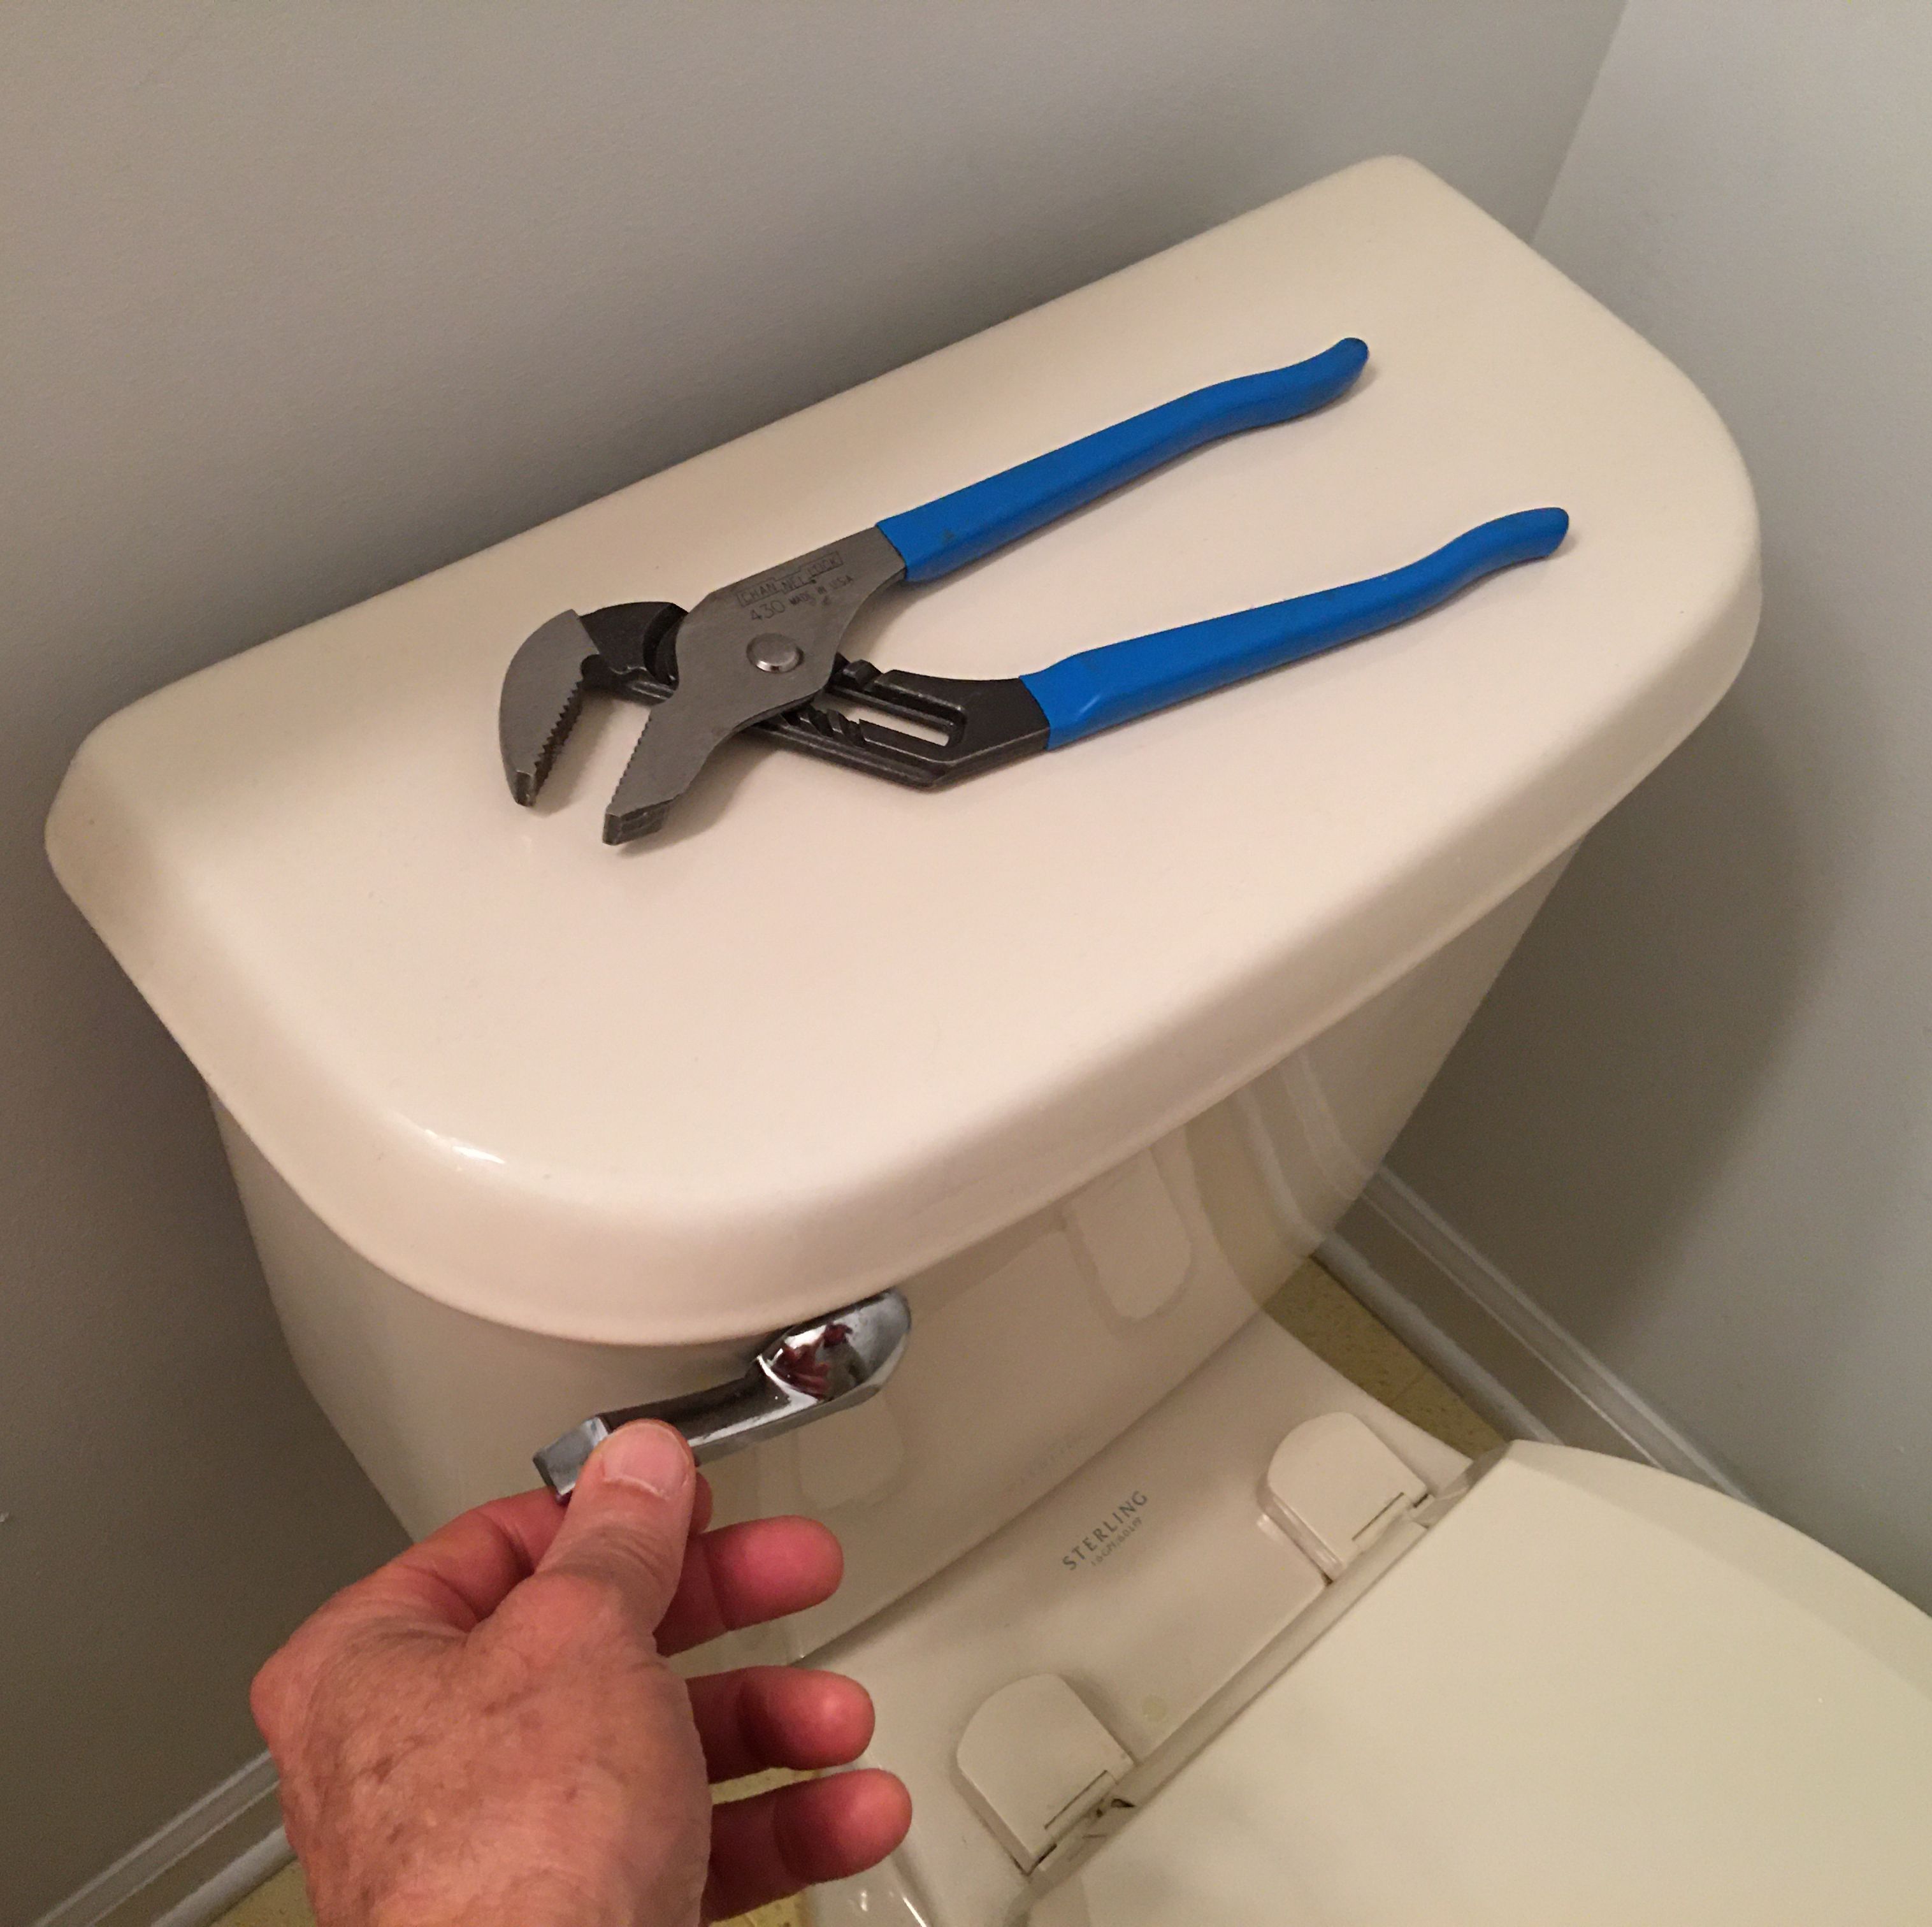 3 Easy Steps to Fix a Broken Toilet